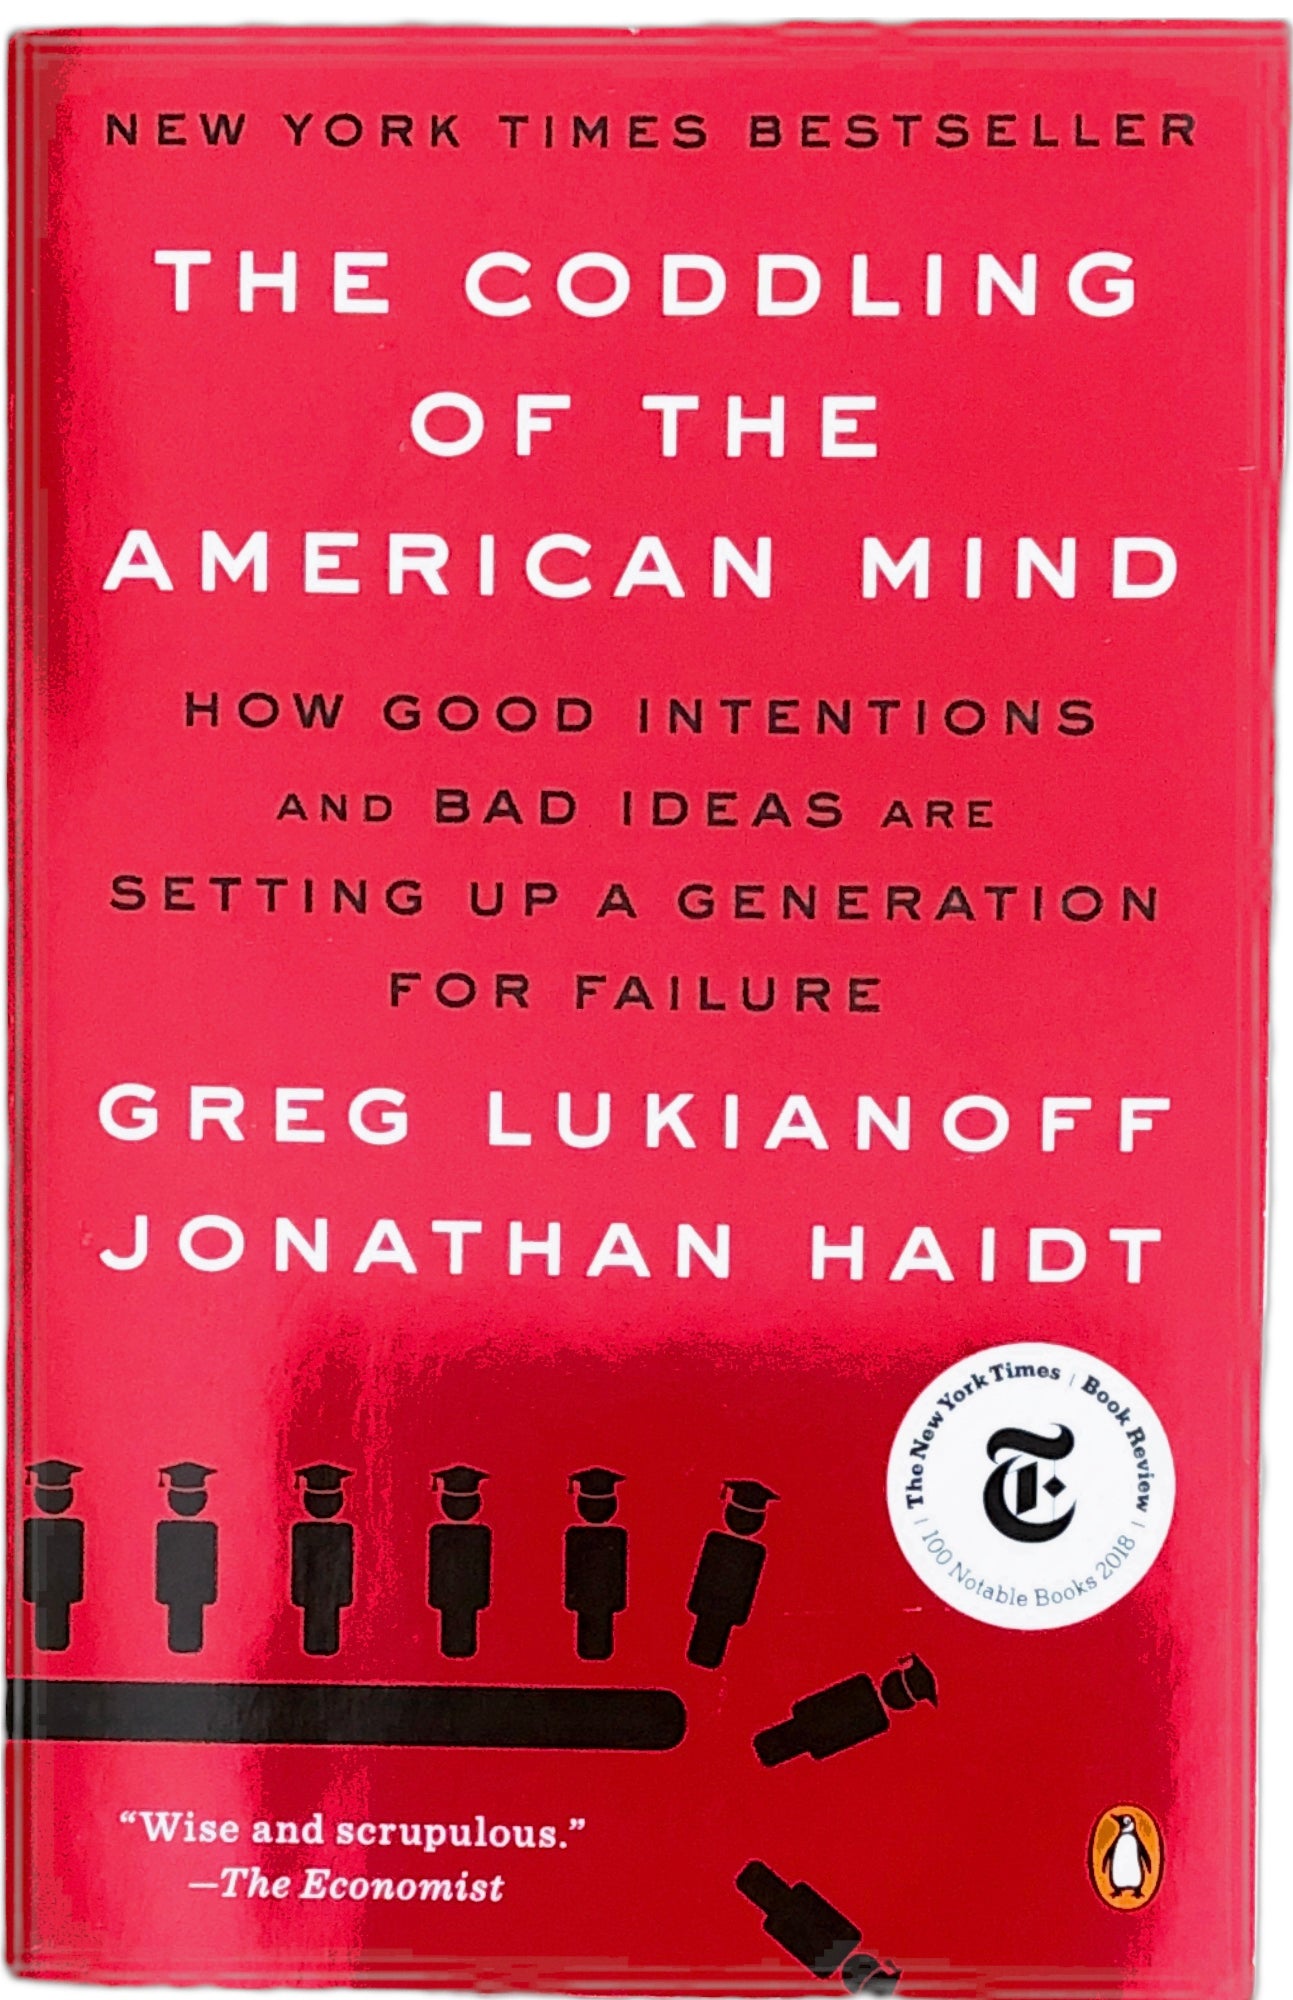 The Coddling of the American Mind by Greg Lukianoff and Jonathan Haidt